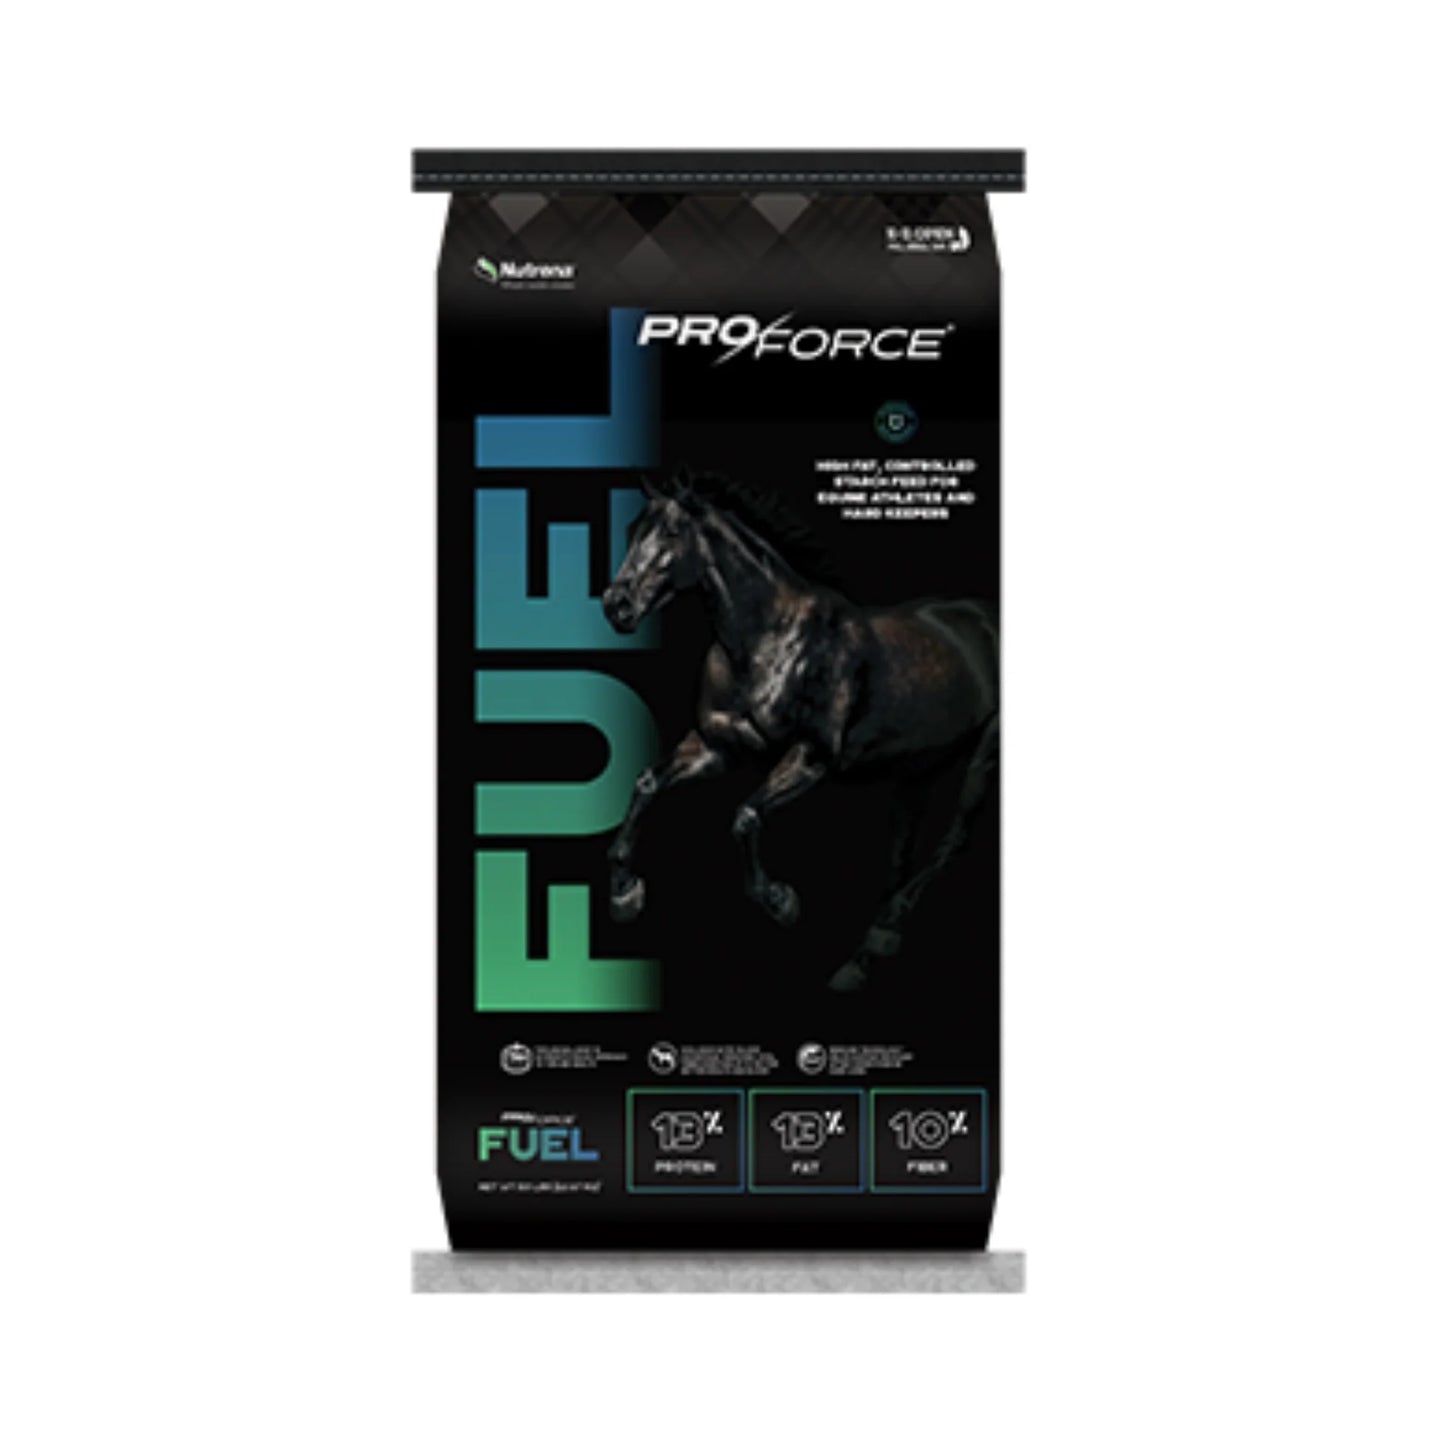 Nutrena Proforce Fuel 13/13 Textured Horse Feed